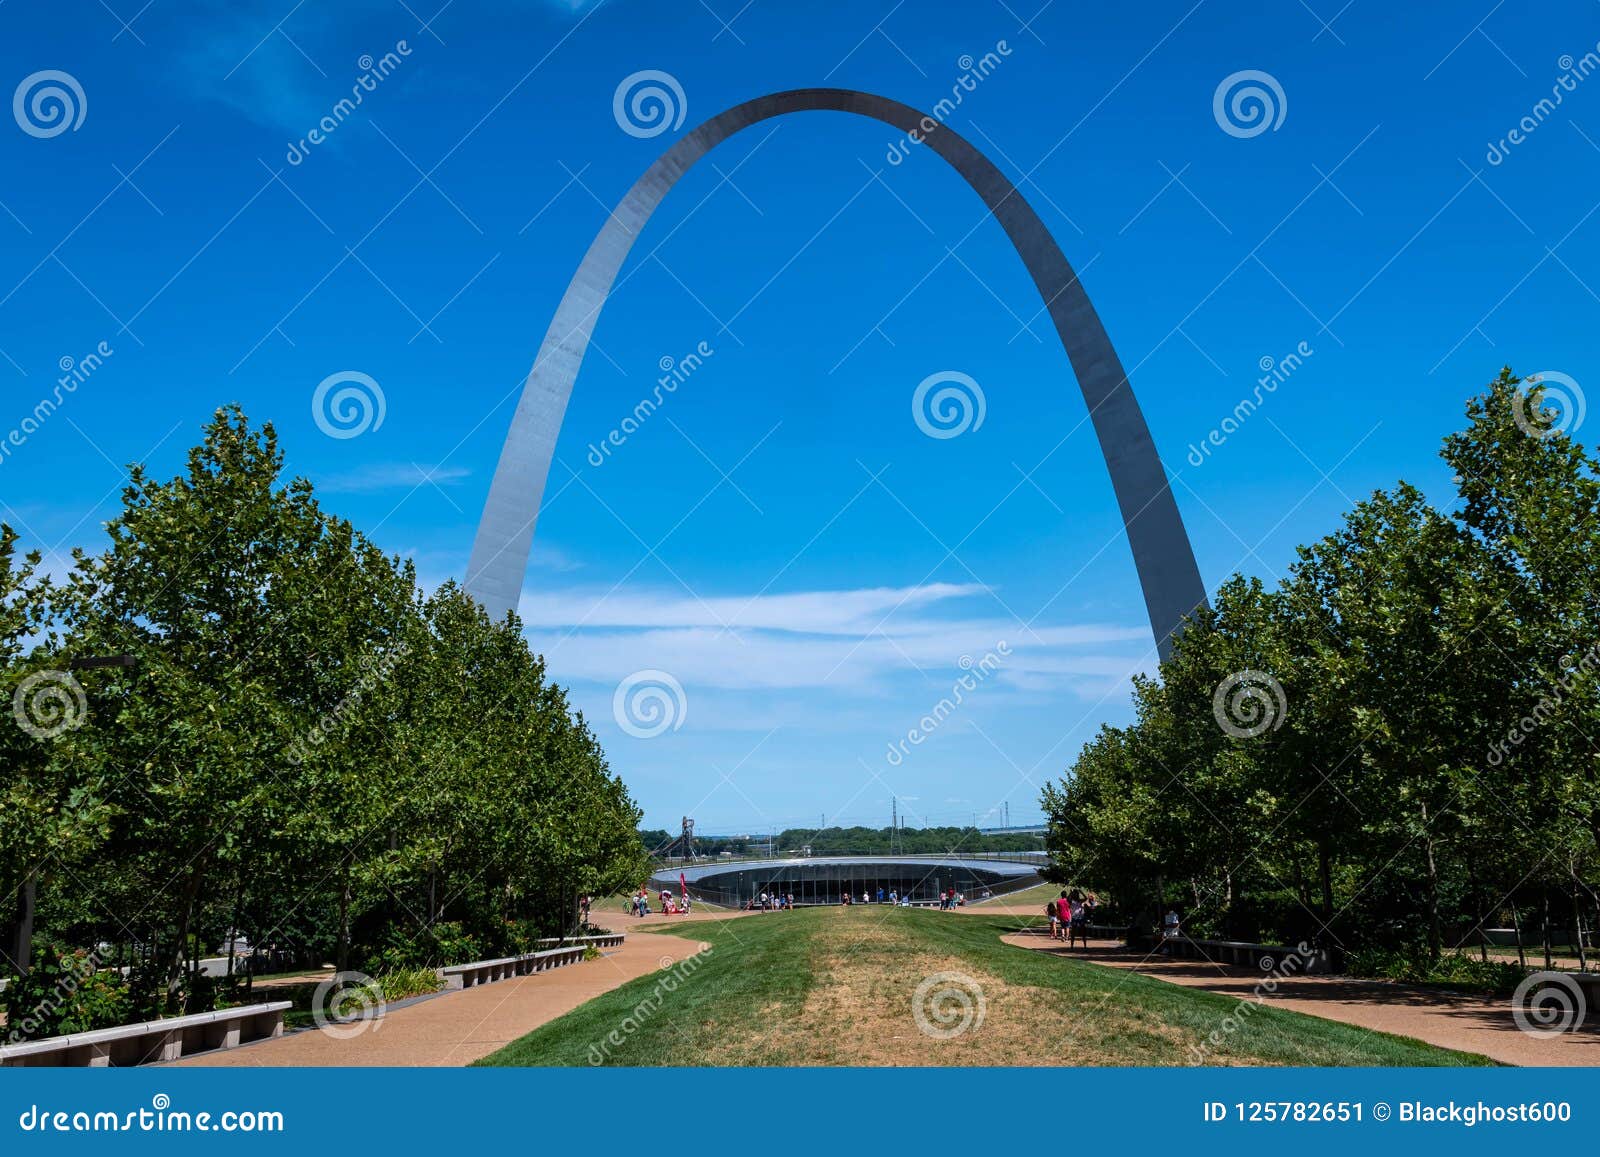 The Gateway Arch National Park In Saint Louis Missouri Editorial Photo - Image of tour, american ...